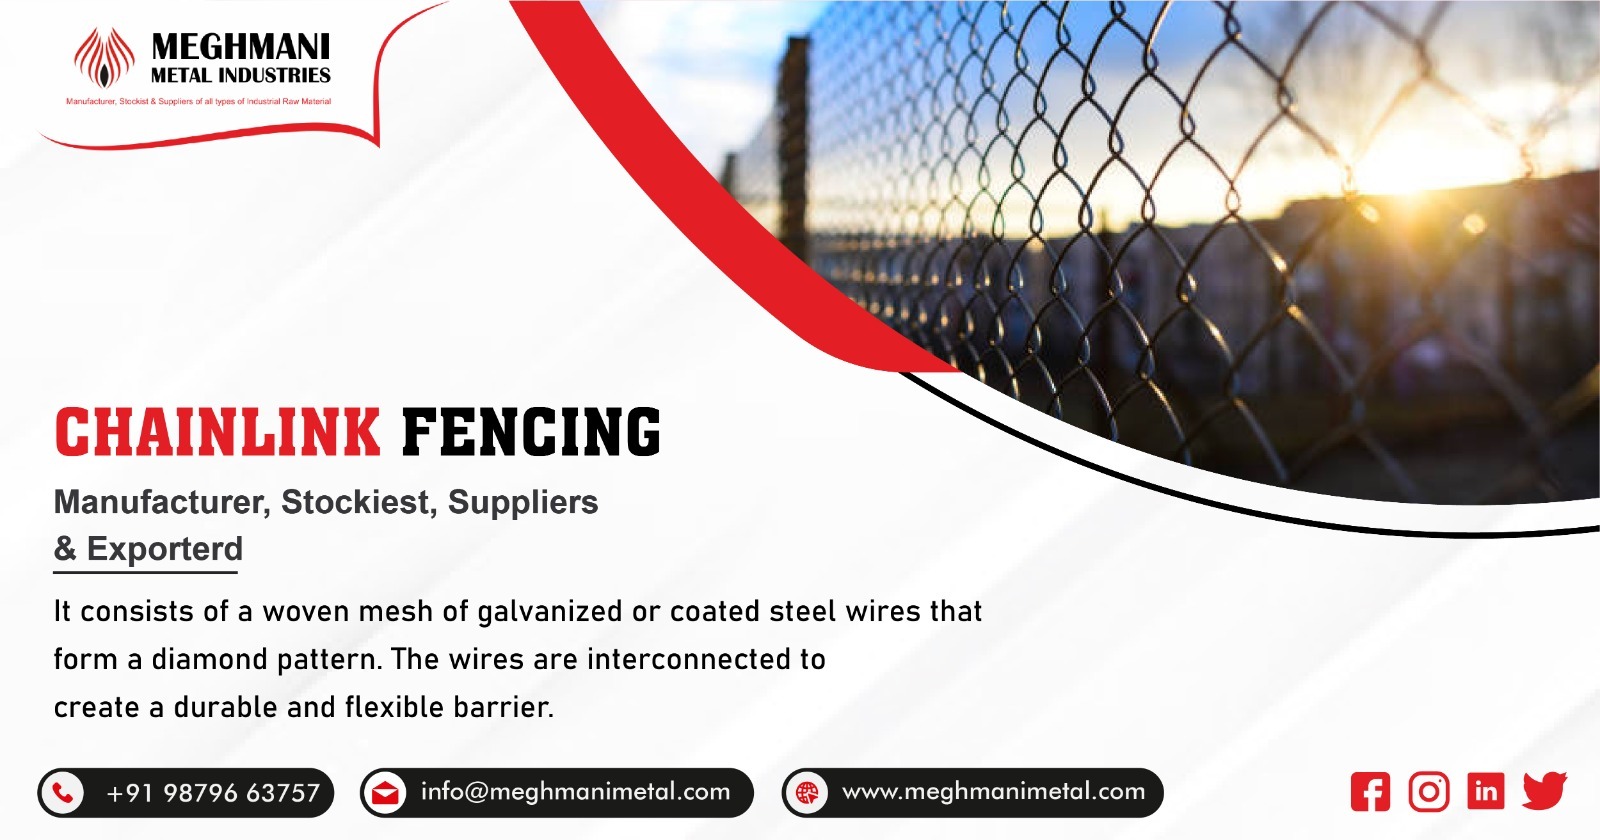 Supplier of Chainlink Fencing in India